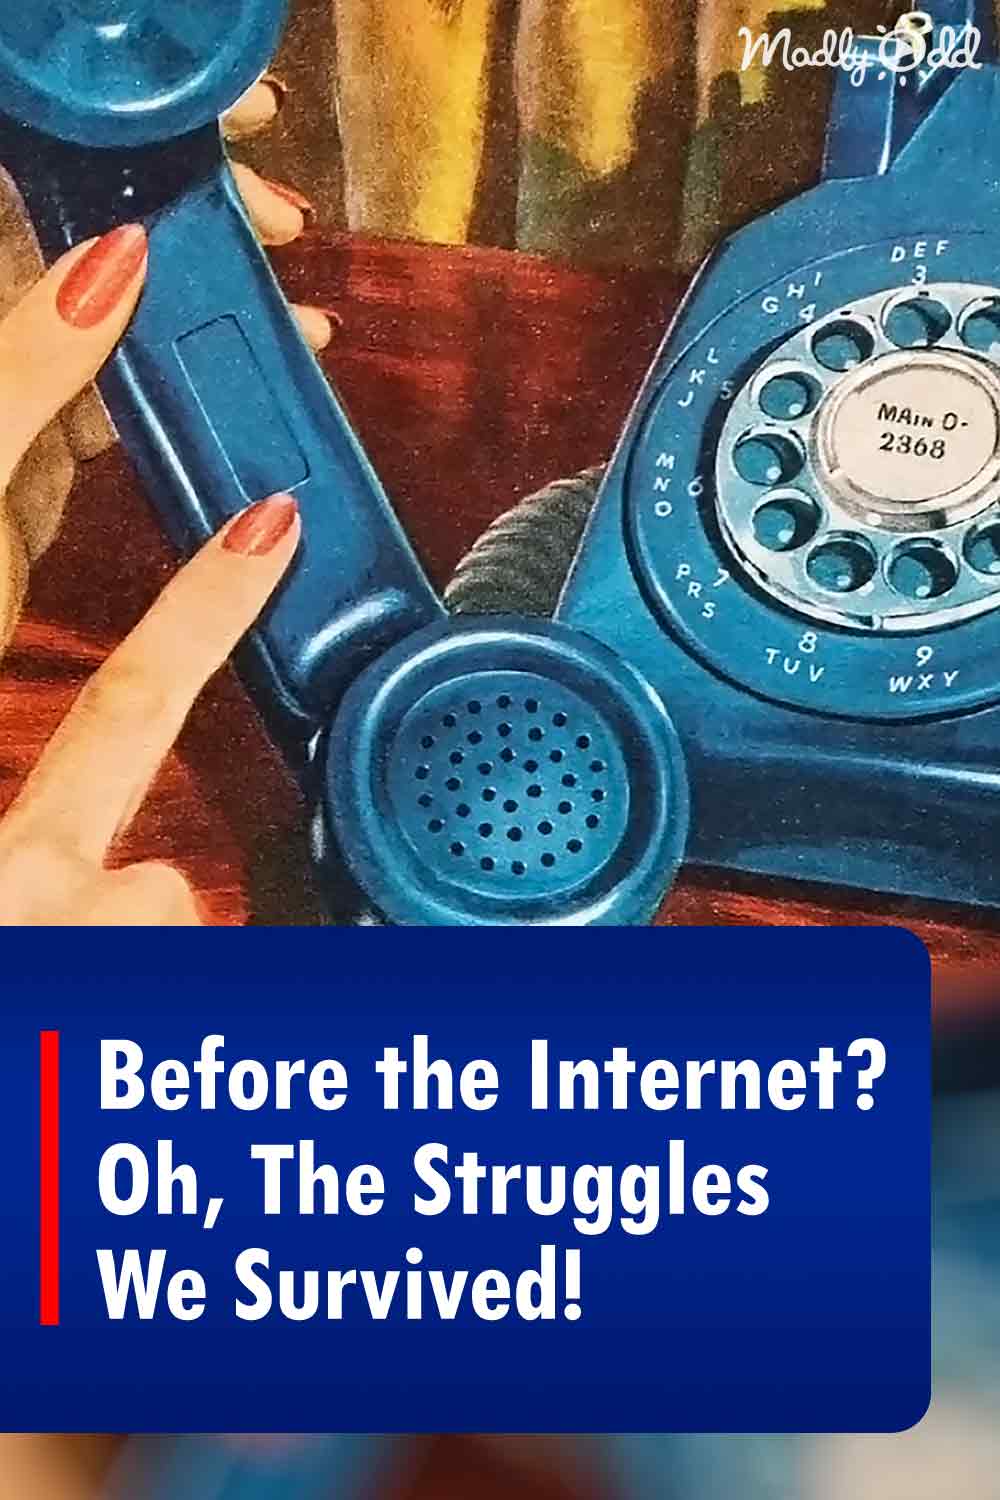 Before the Internet? Oh, The Struggles We Survived!